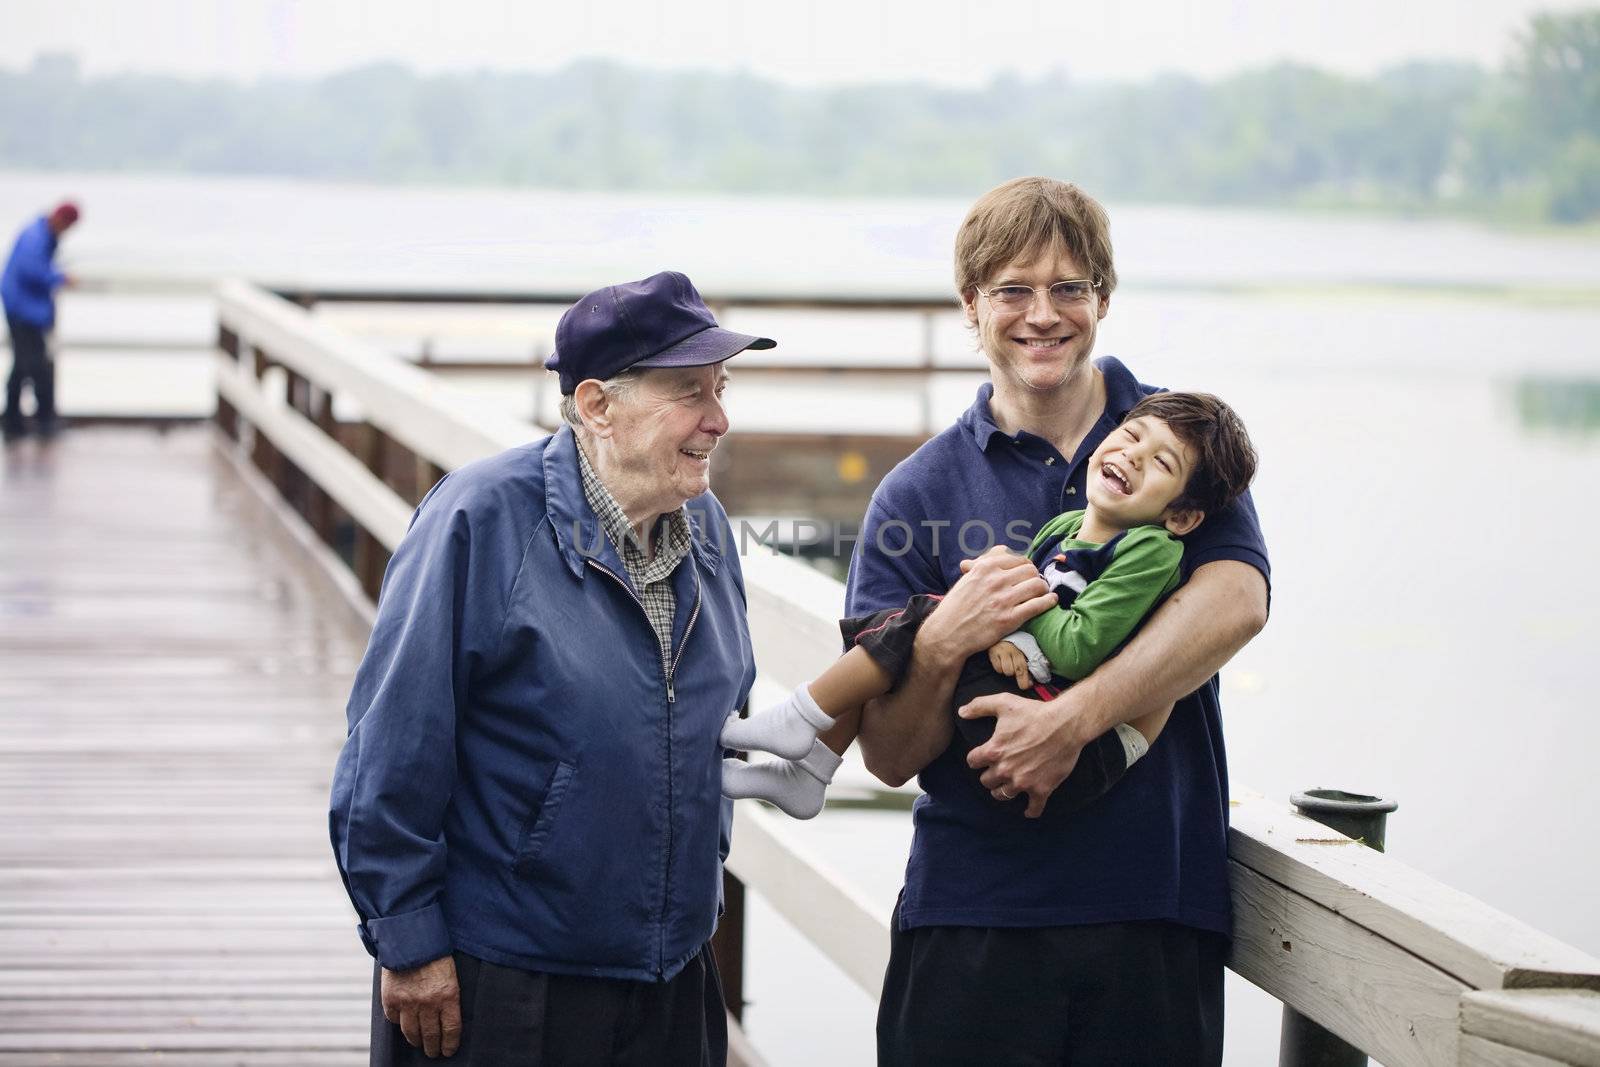 Three generations interacting together on the dock on misty morning